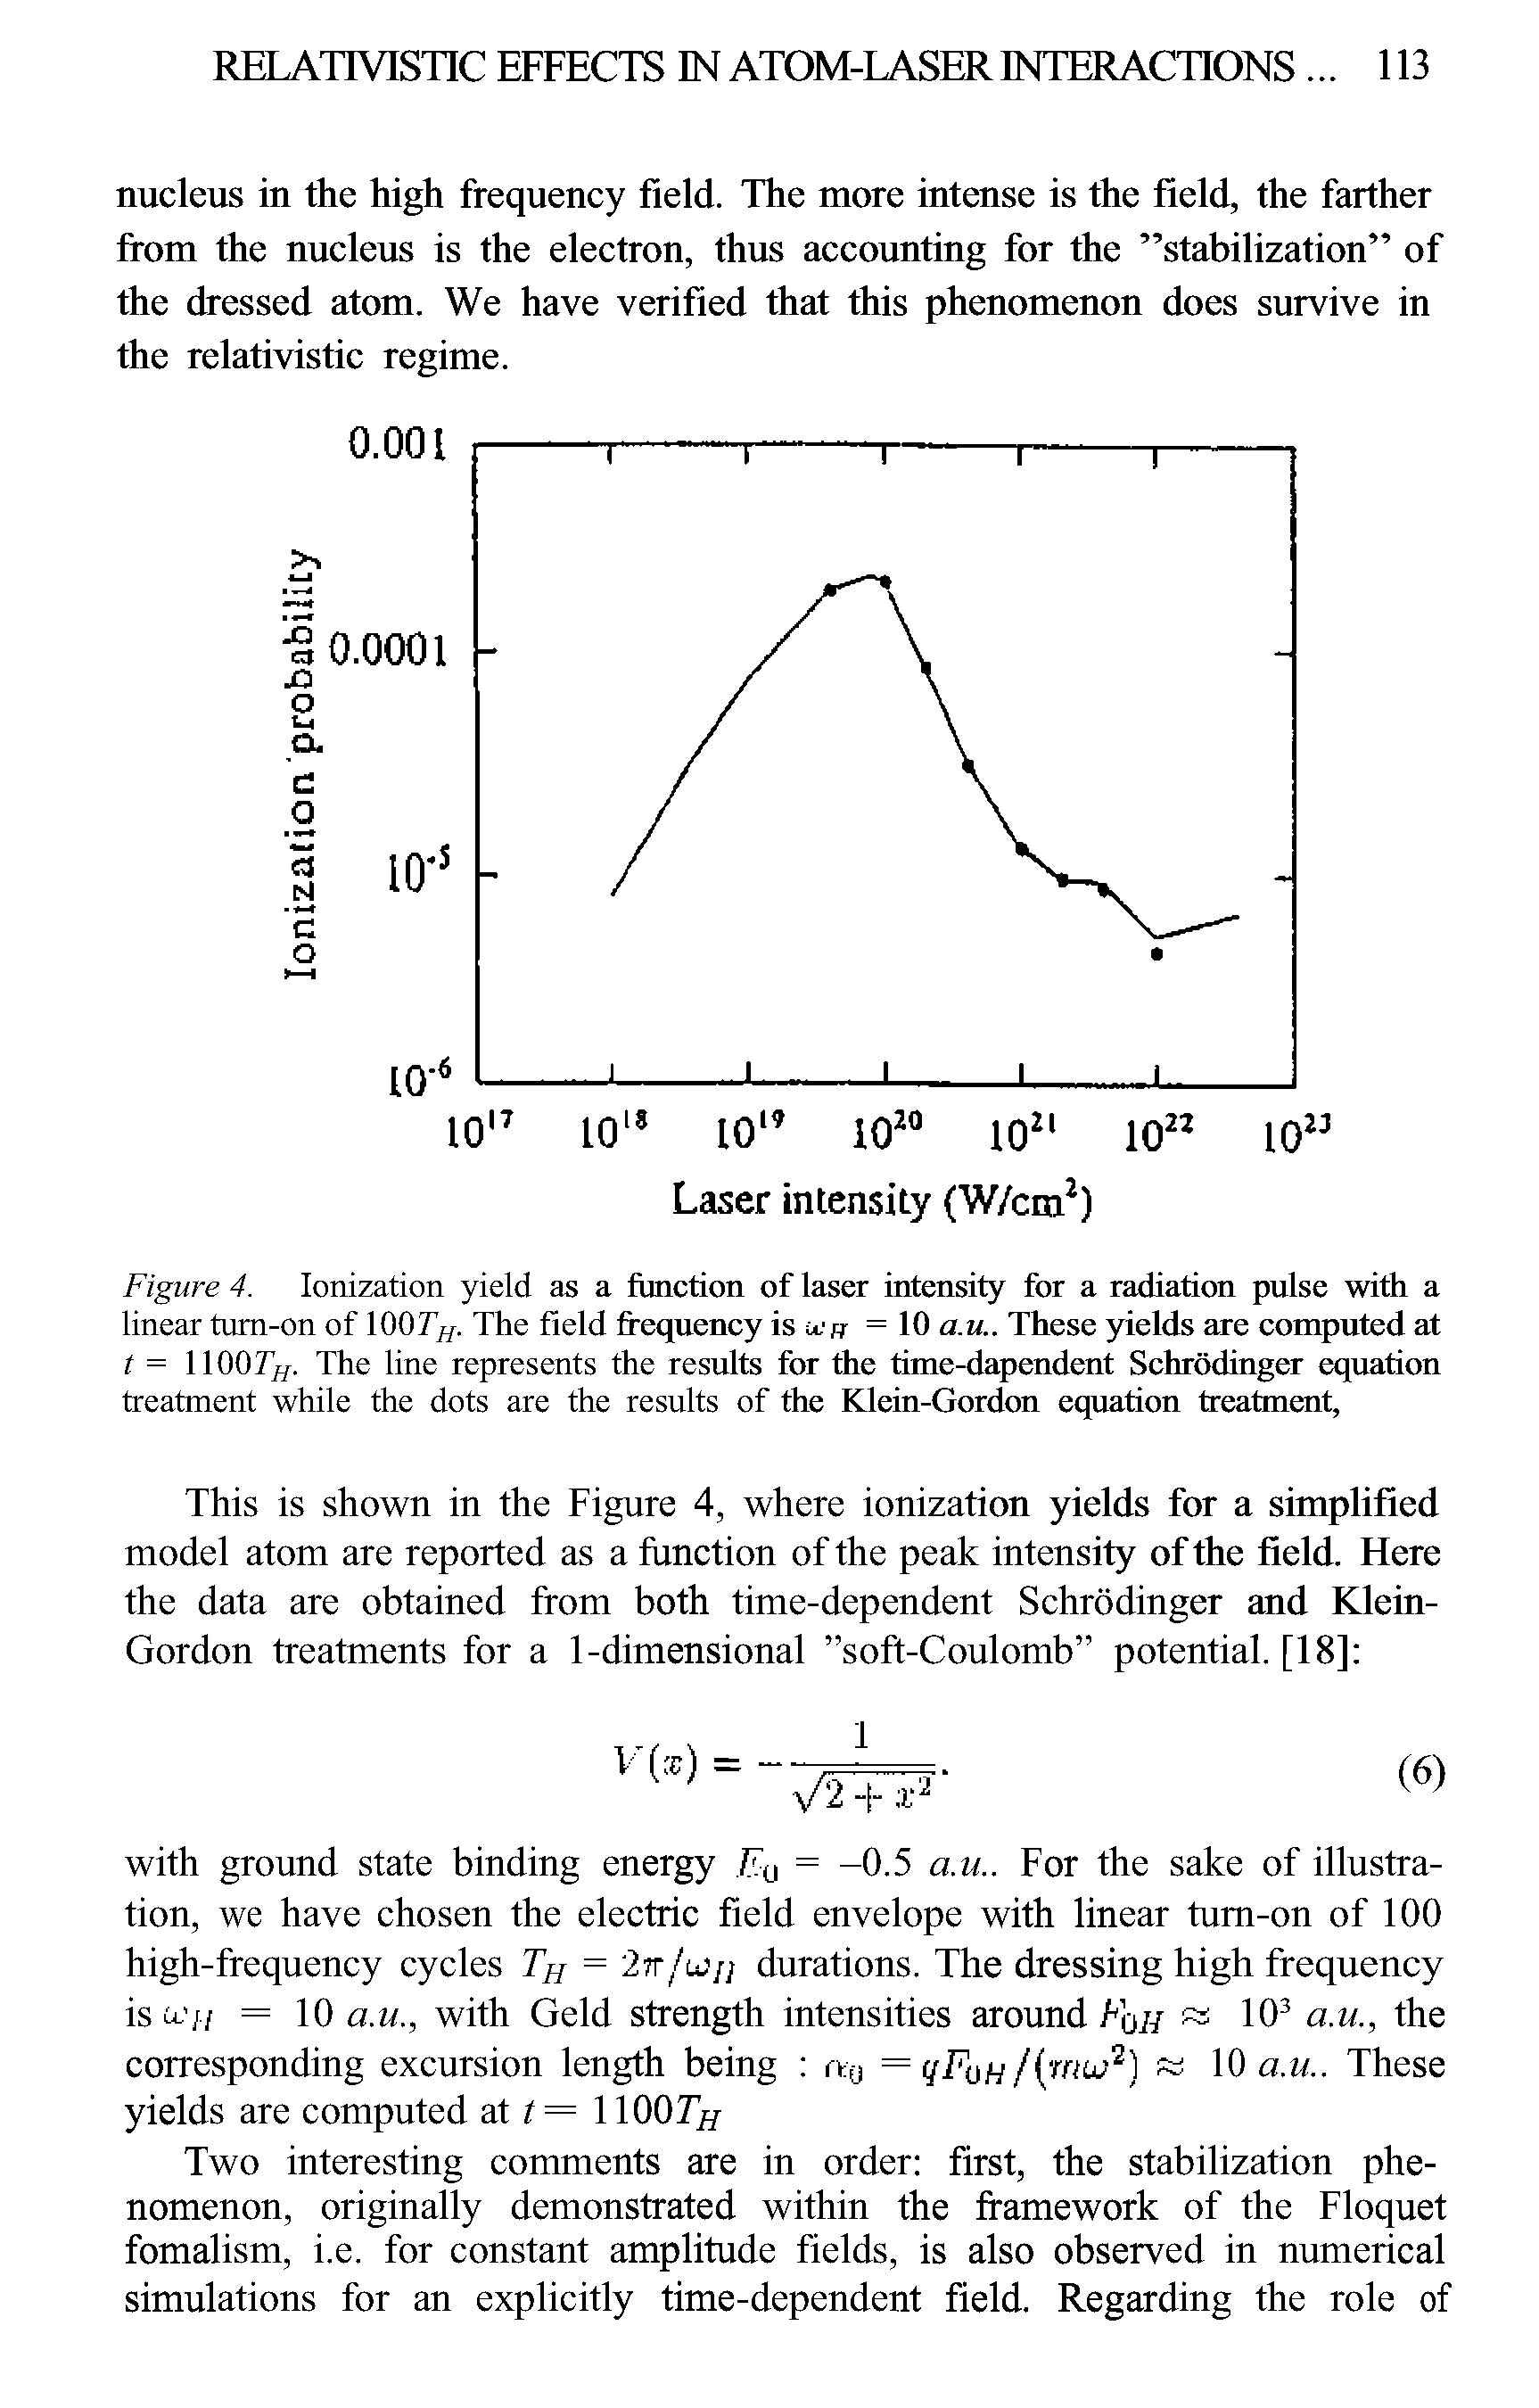 Figure 4. Ionization yield as a function of laser intensity for a radiation pulse with a linear tum-on of 1007 //. The field frequency is an = 10 a.u.. These yields are computed at t = 11007 //. The line represents the results for the time-dapendent Schrodinger equation treatment while the dots are the results of the Klein-Gordon equation treatment,...